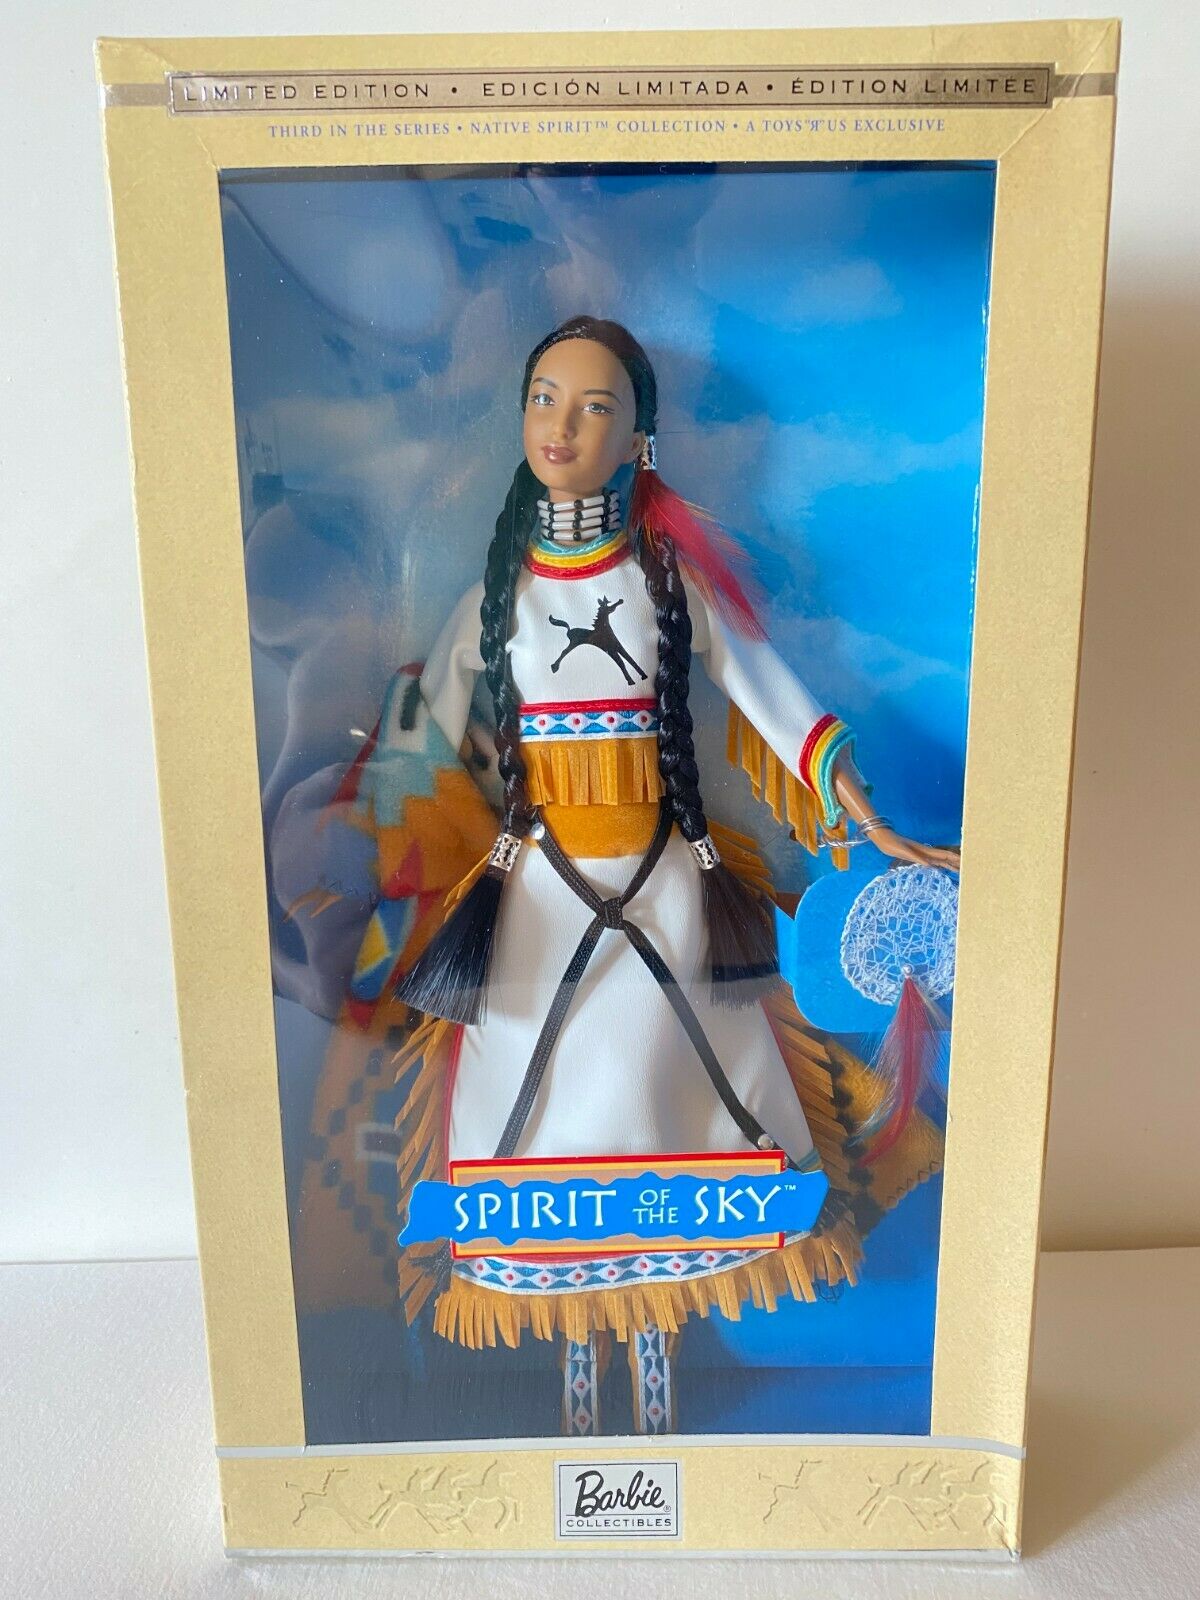 Mattel 2002 Barbie Native Collection Spirit Of The Sky Tru Exclusive Doll Mib